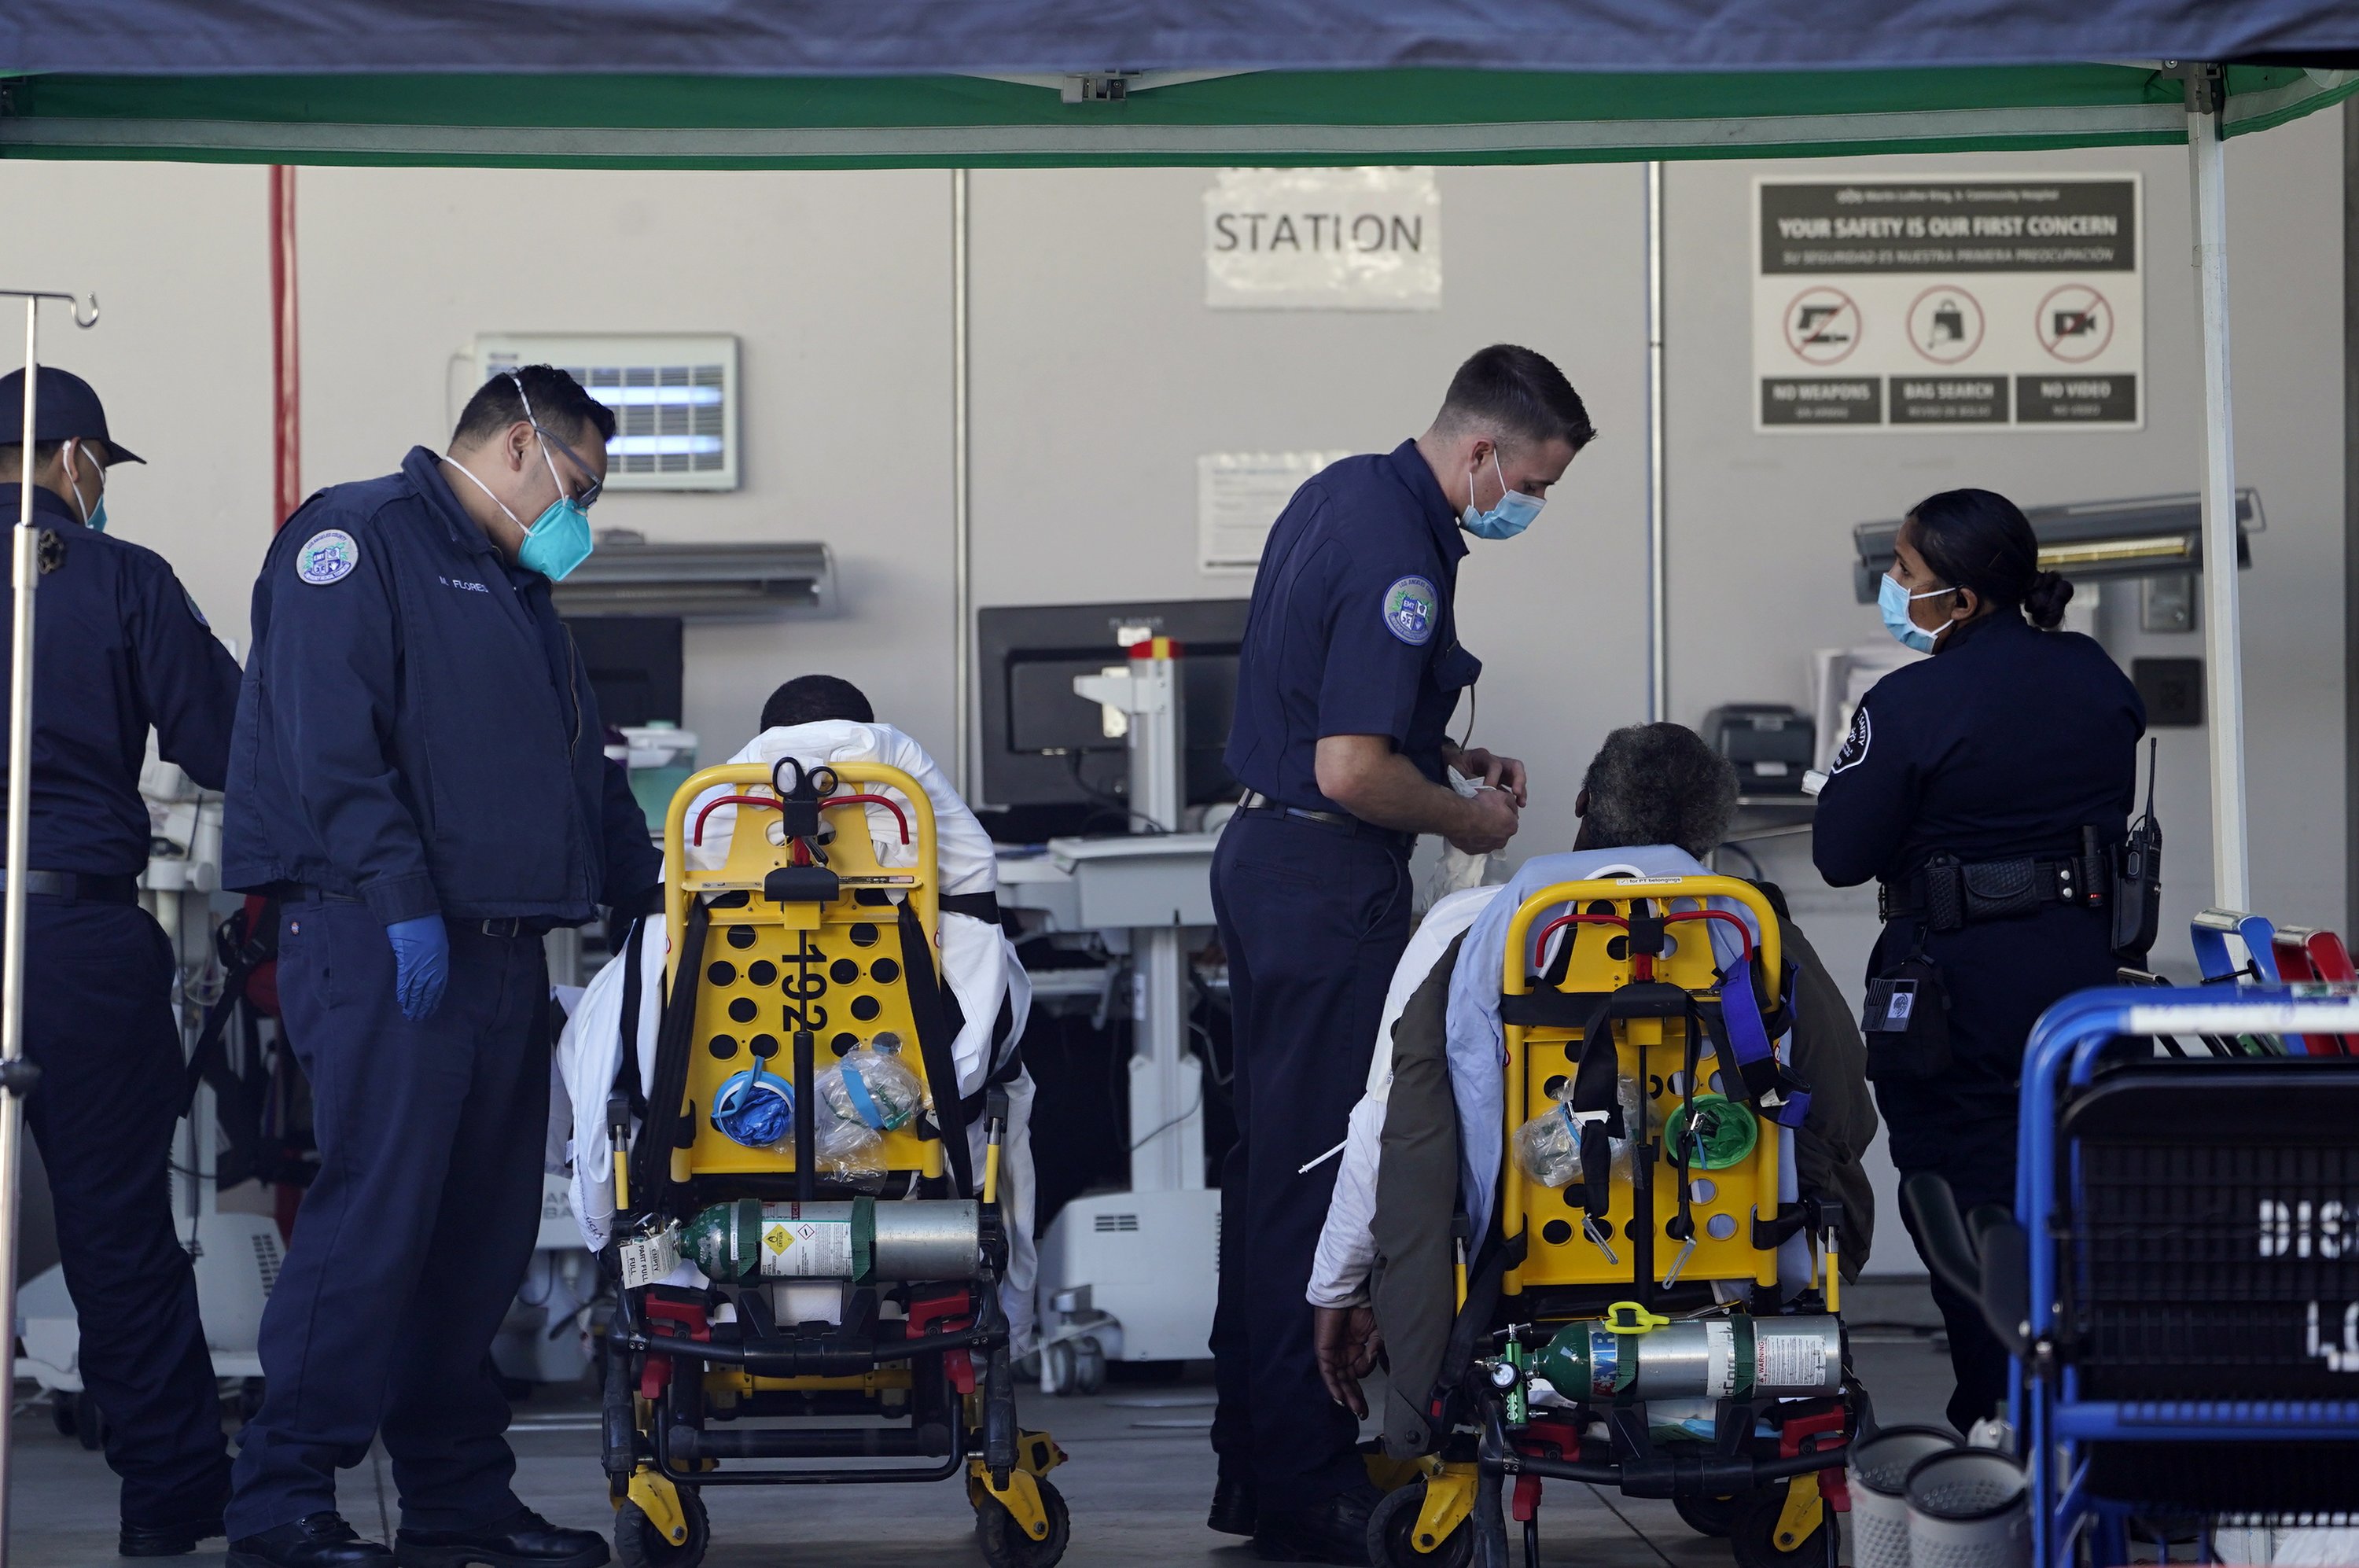 Accumulated cases push California’s COVID-19 deaths to over 50,000